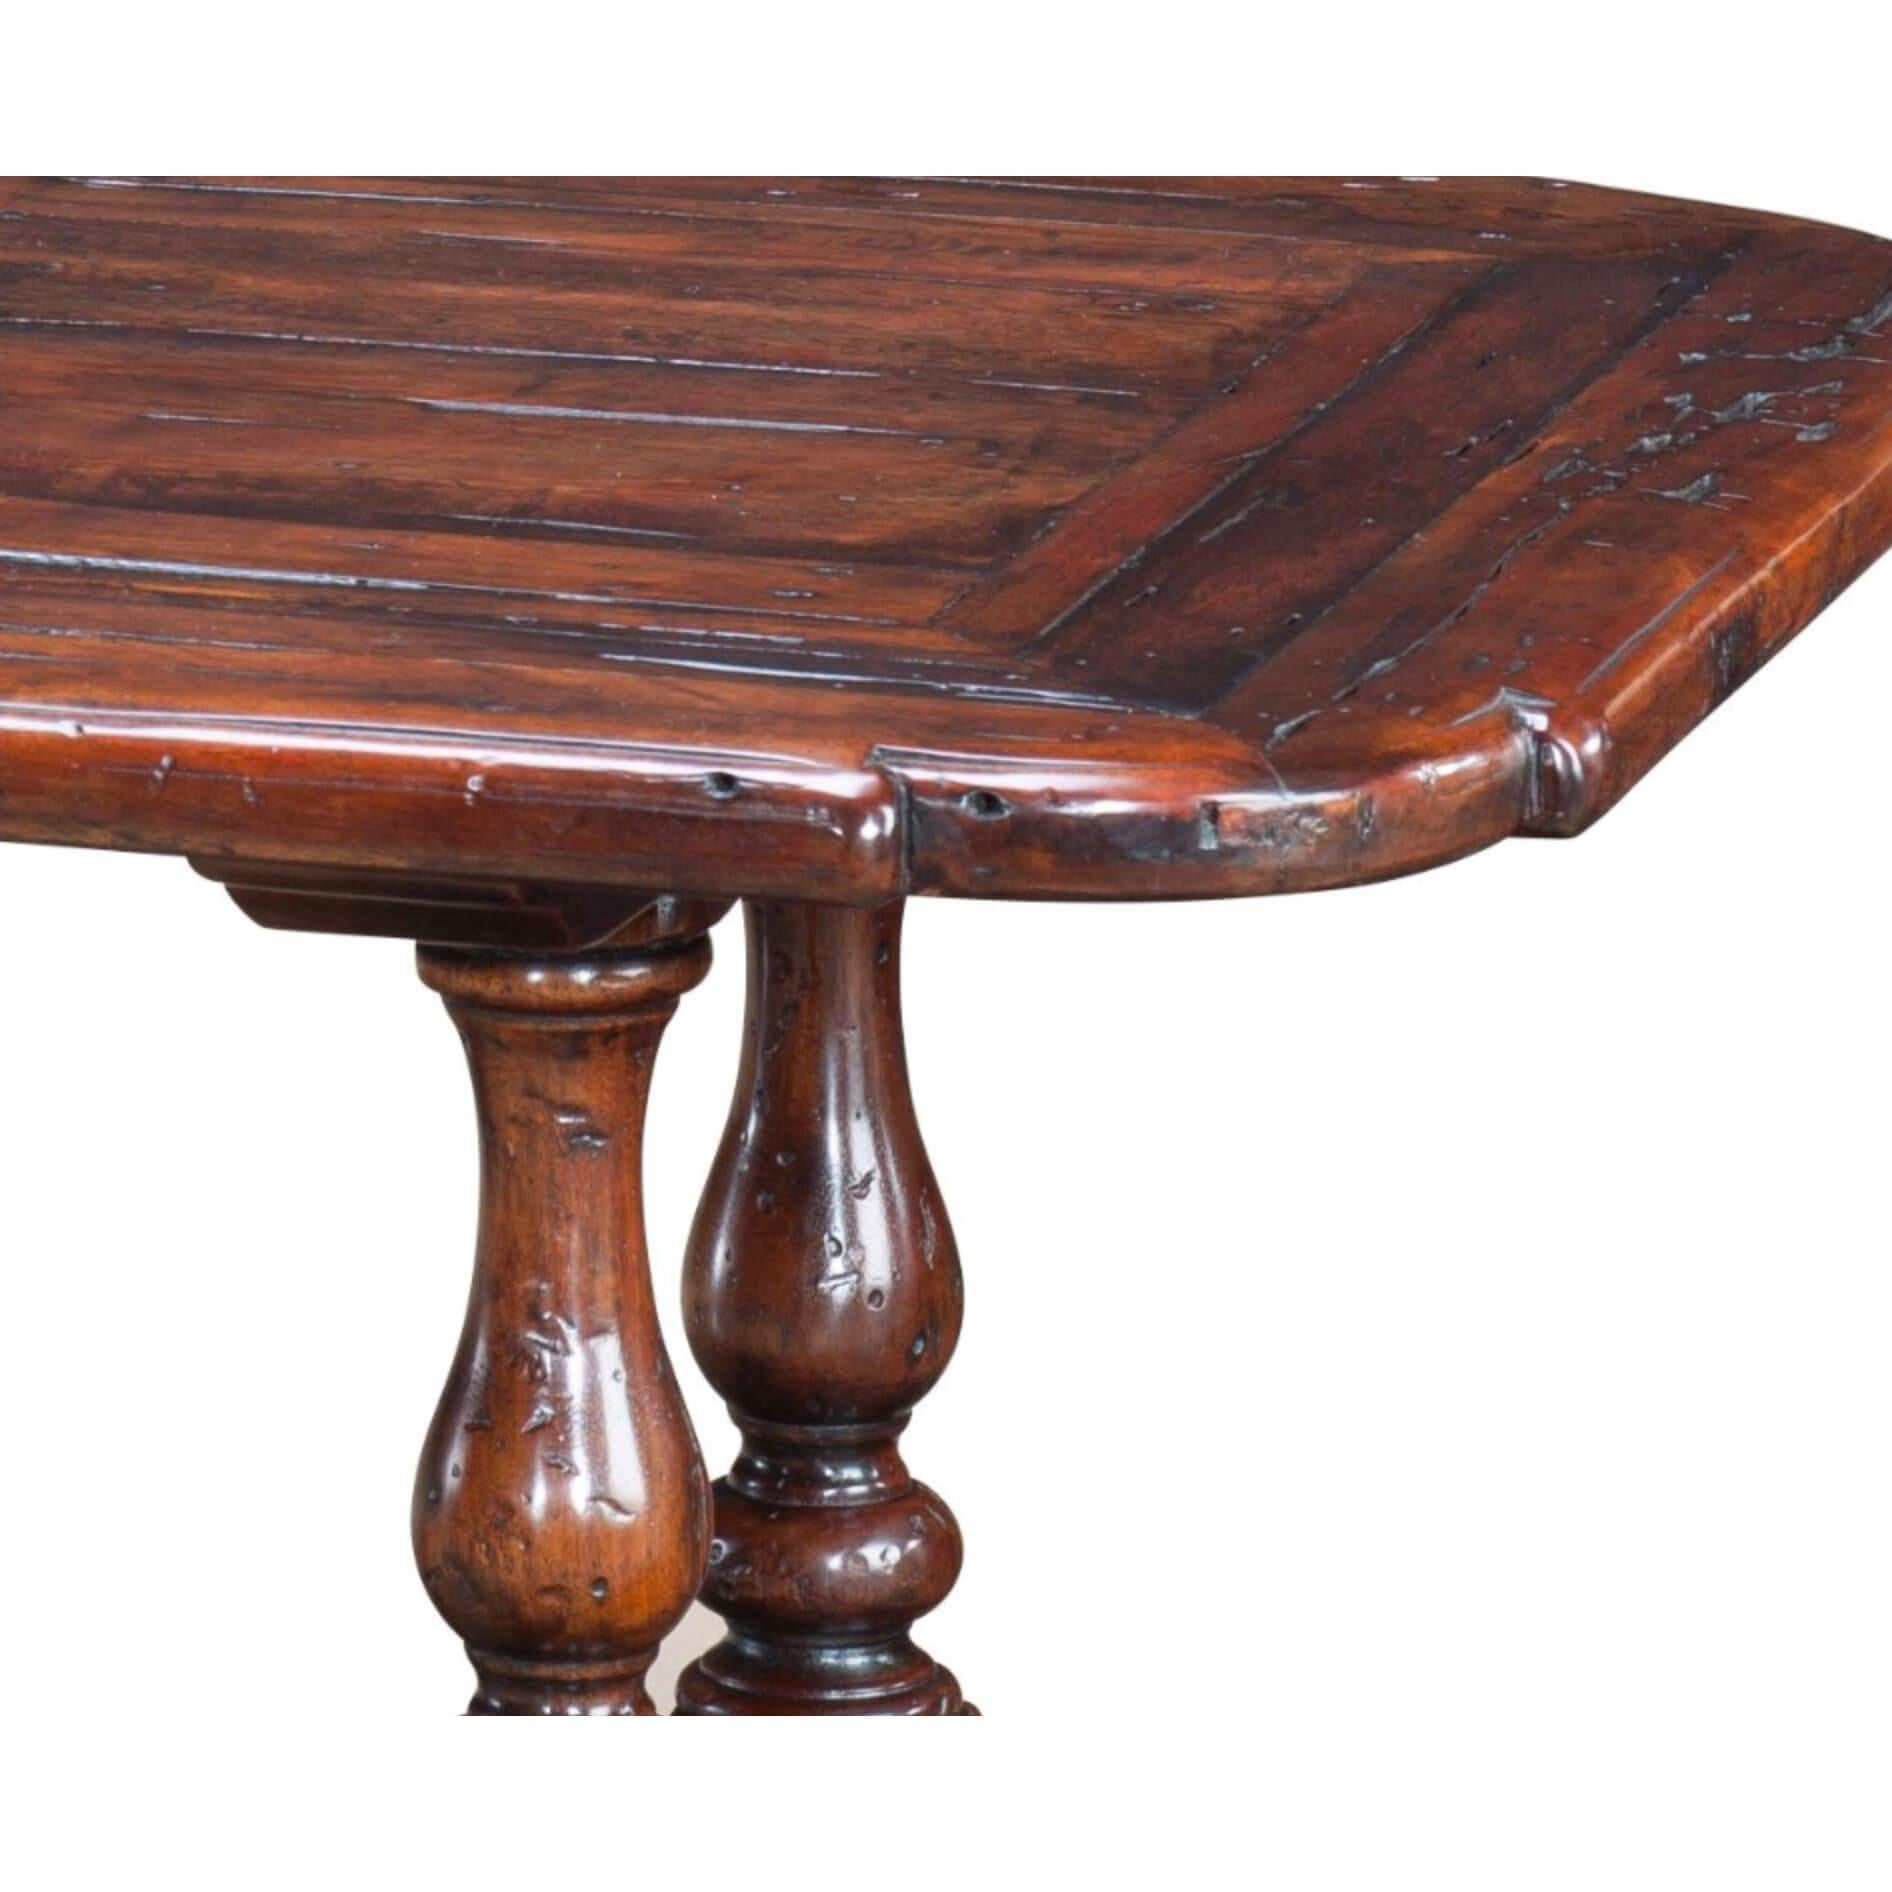 An antiqued wood cocktail table, the rounded re-entrant corners above double turned end balusters joined by a pegged stretcher. The original 17th century.

Dimensions: 60